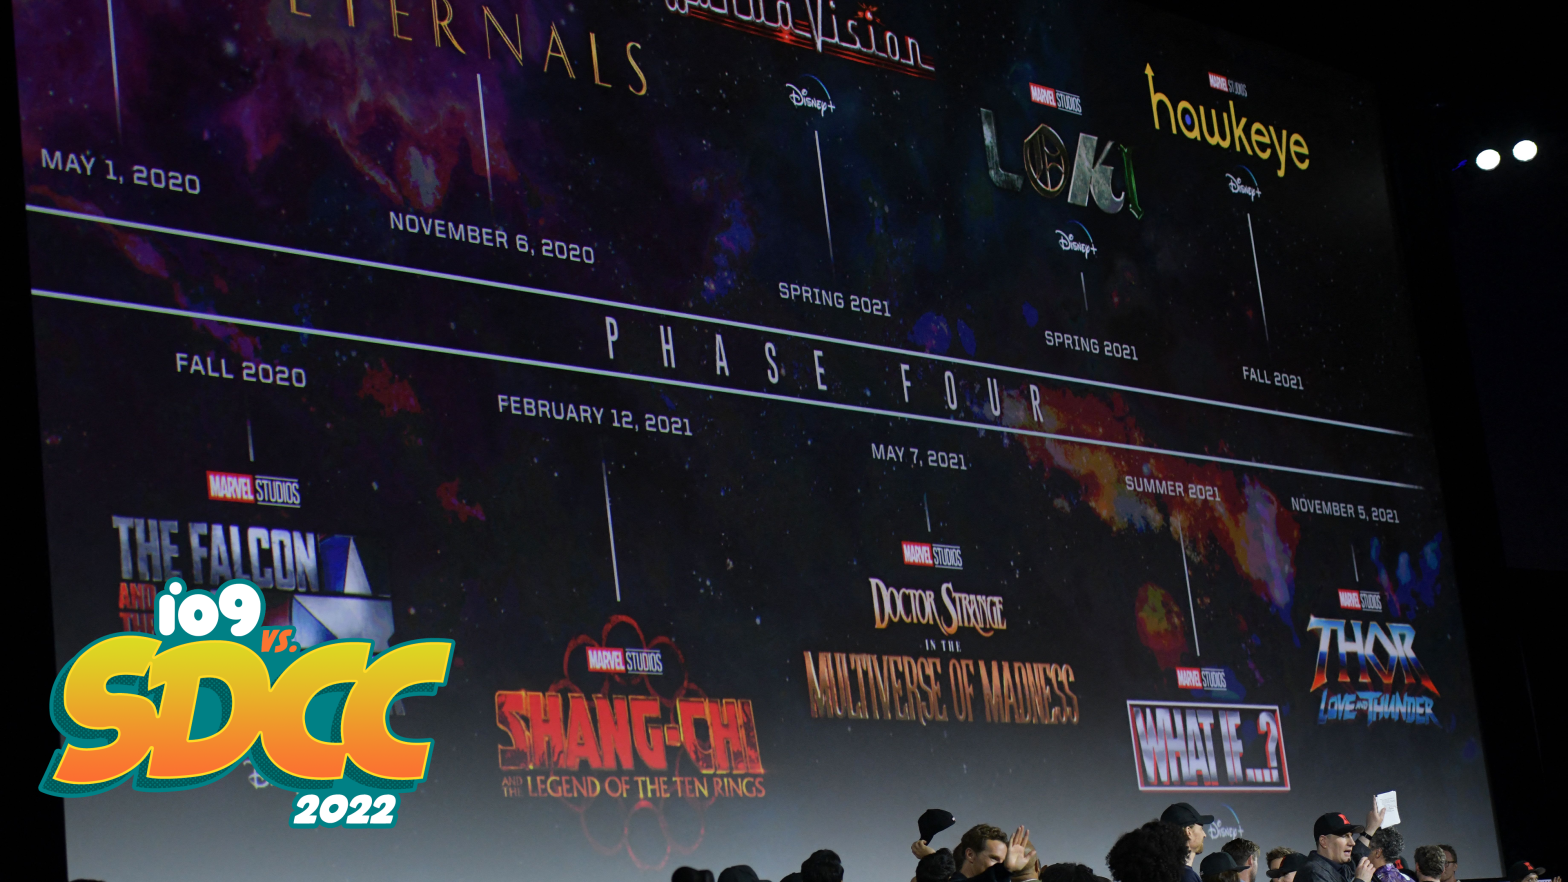 The view of Phase Four from Entertainment Con, 2019 (Photo: Chris Delmas, Getty Images)